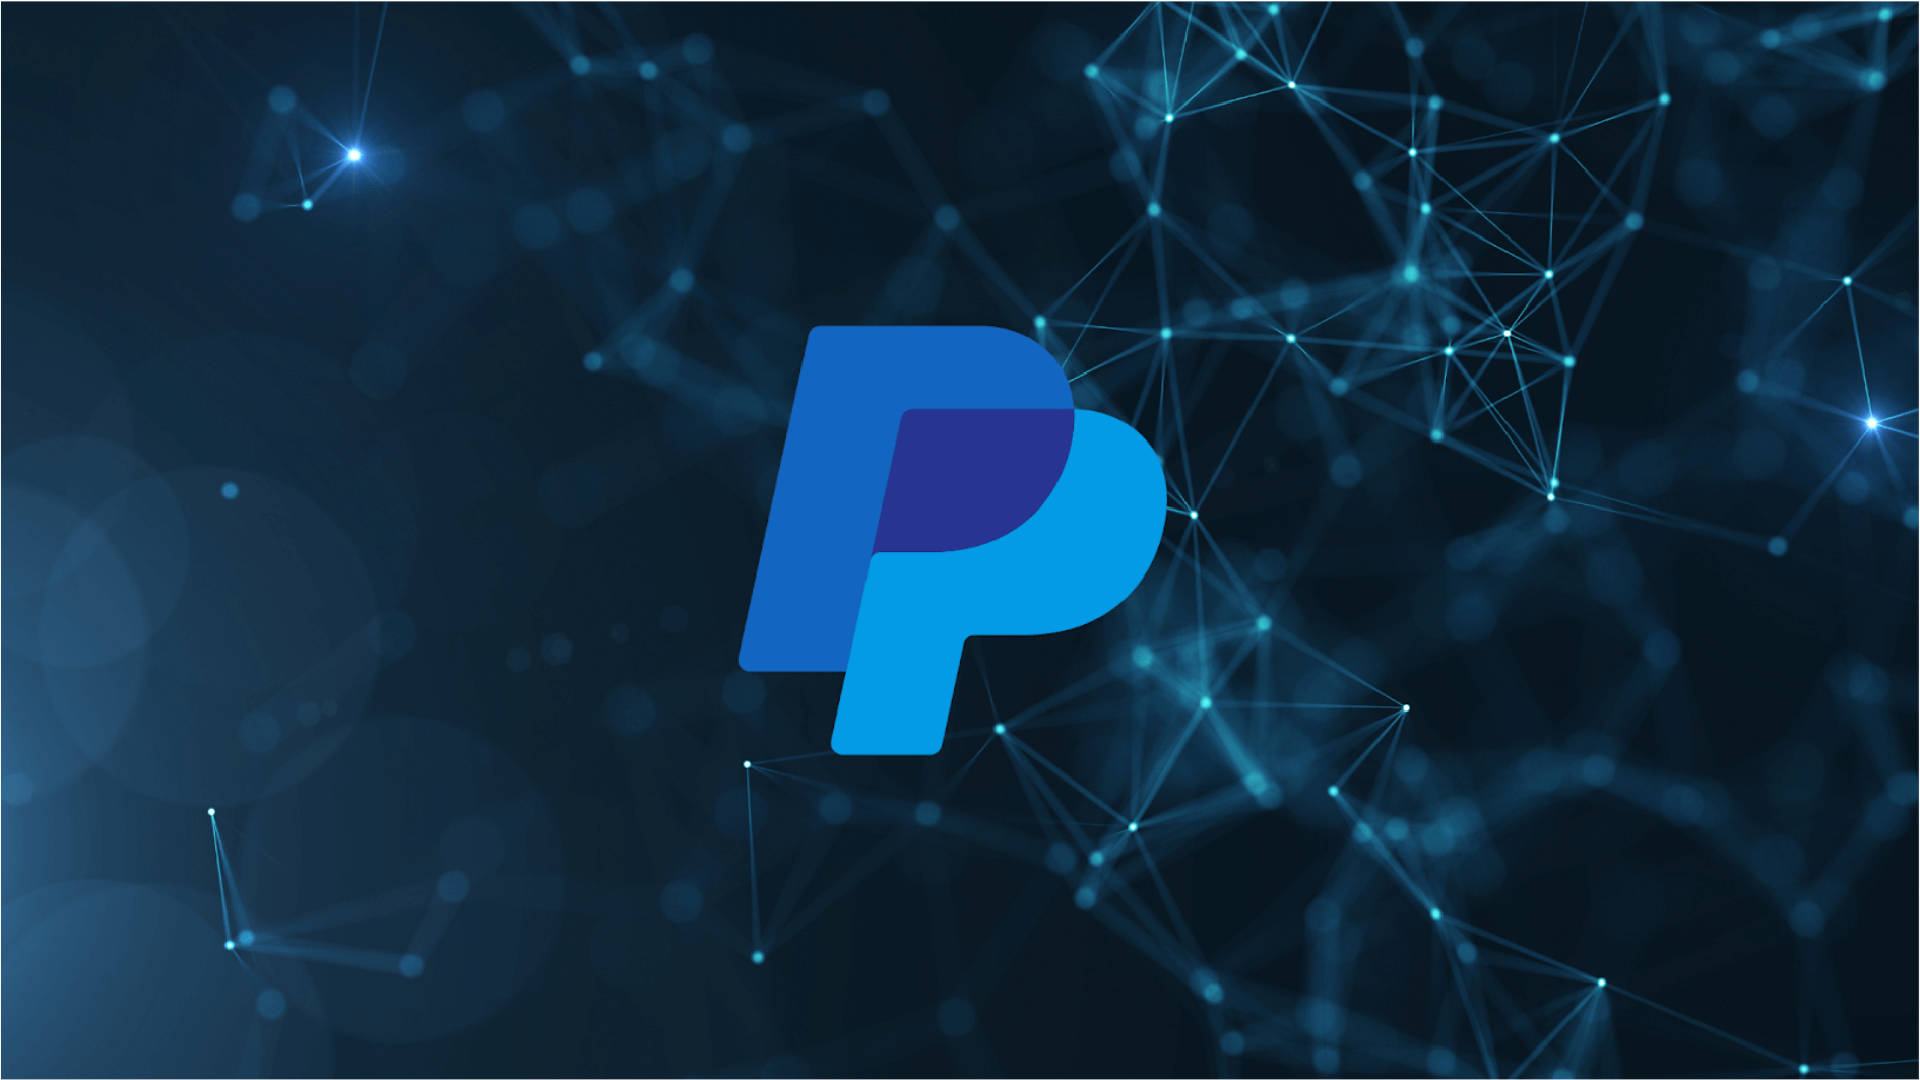 Paypal Logo Abstract Network Design